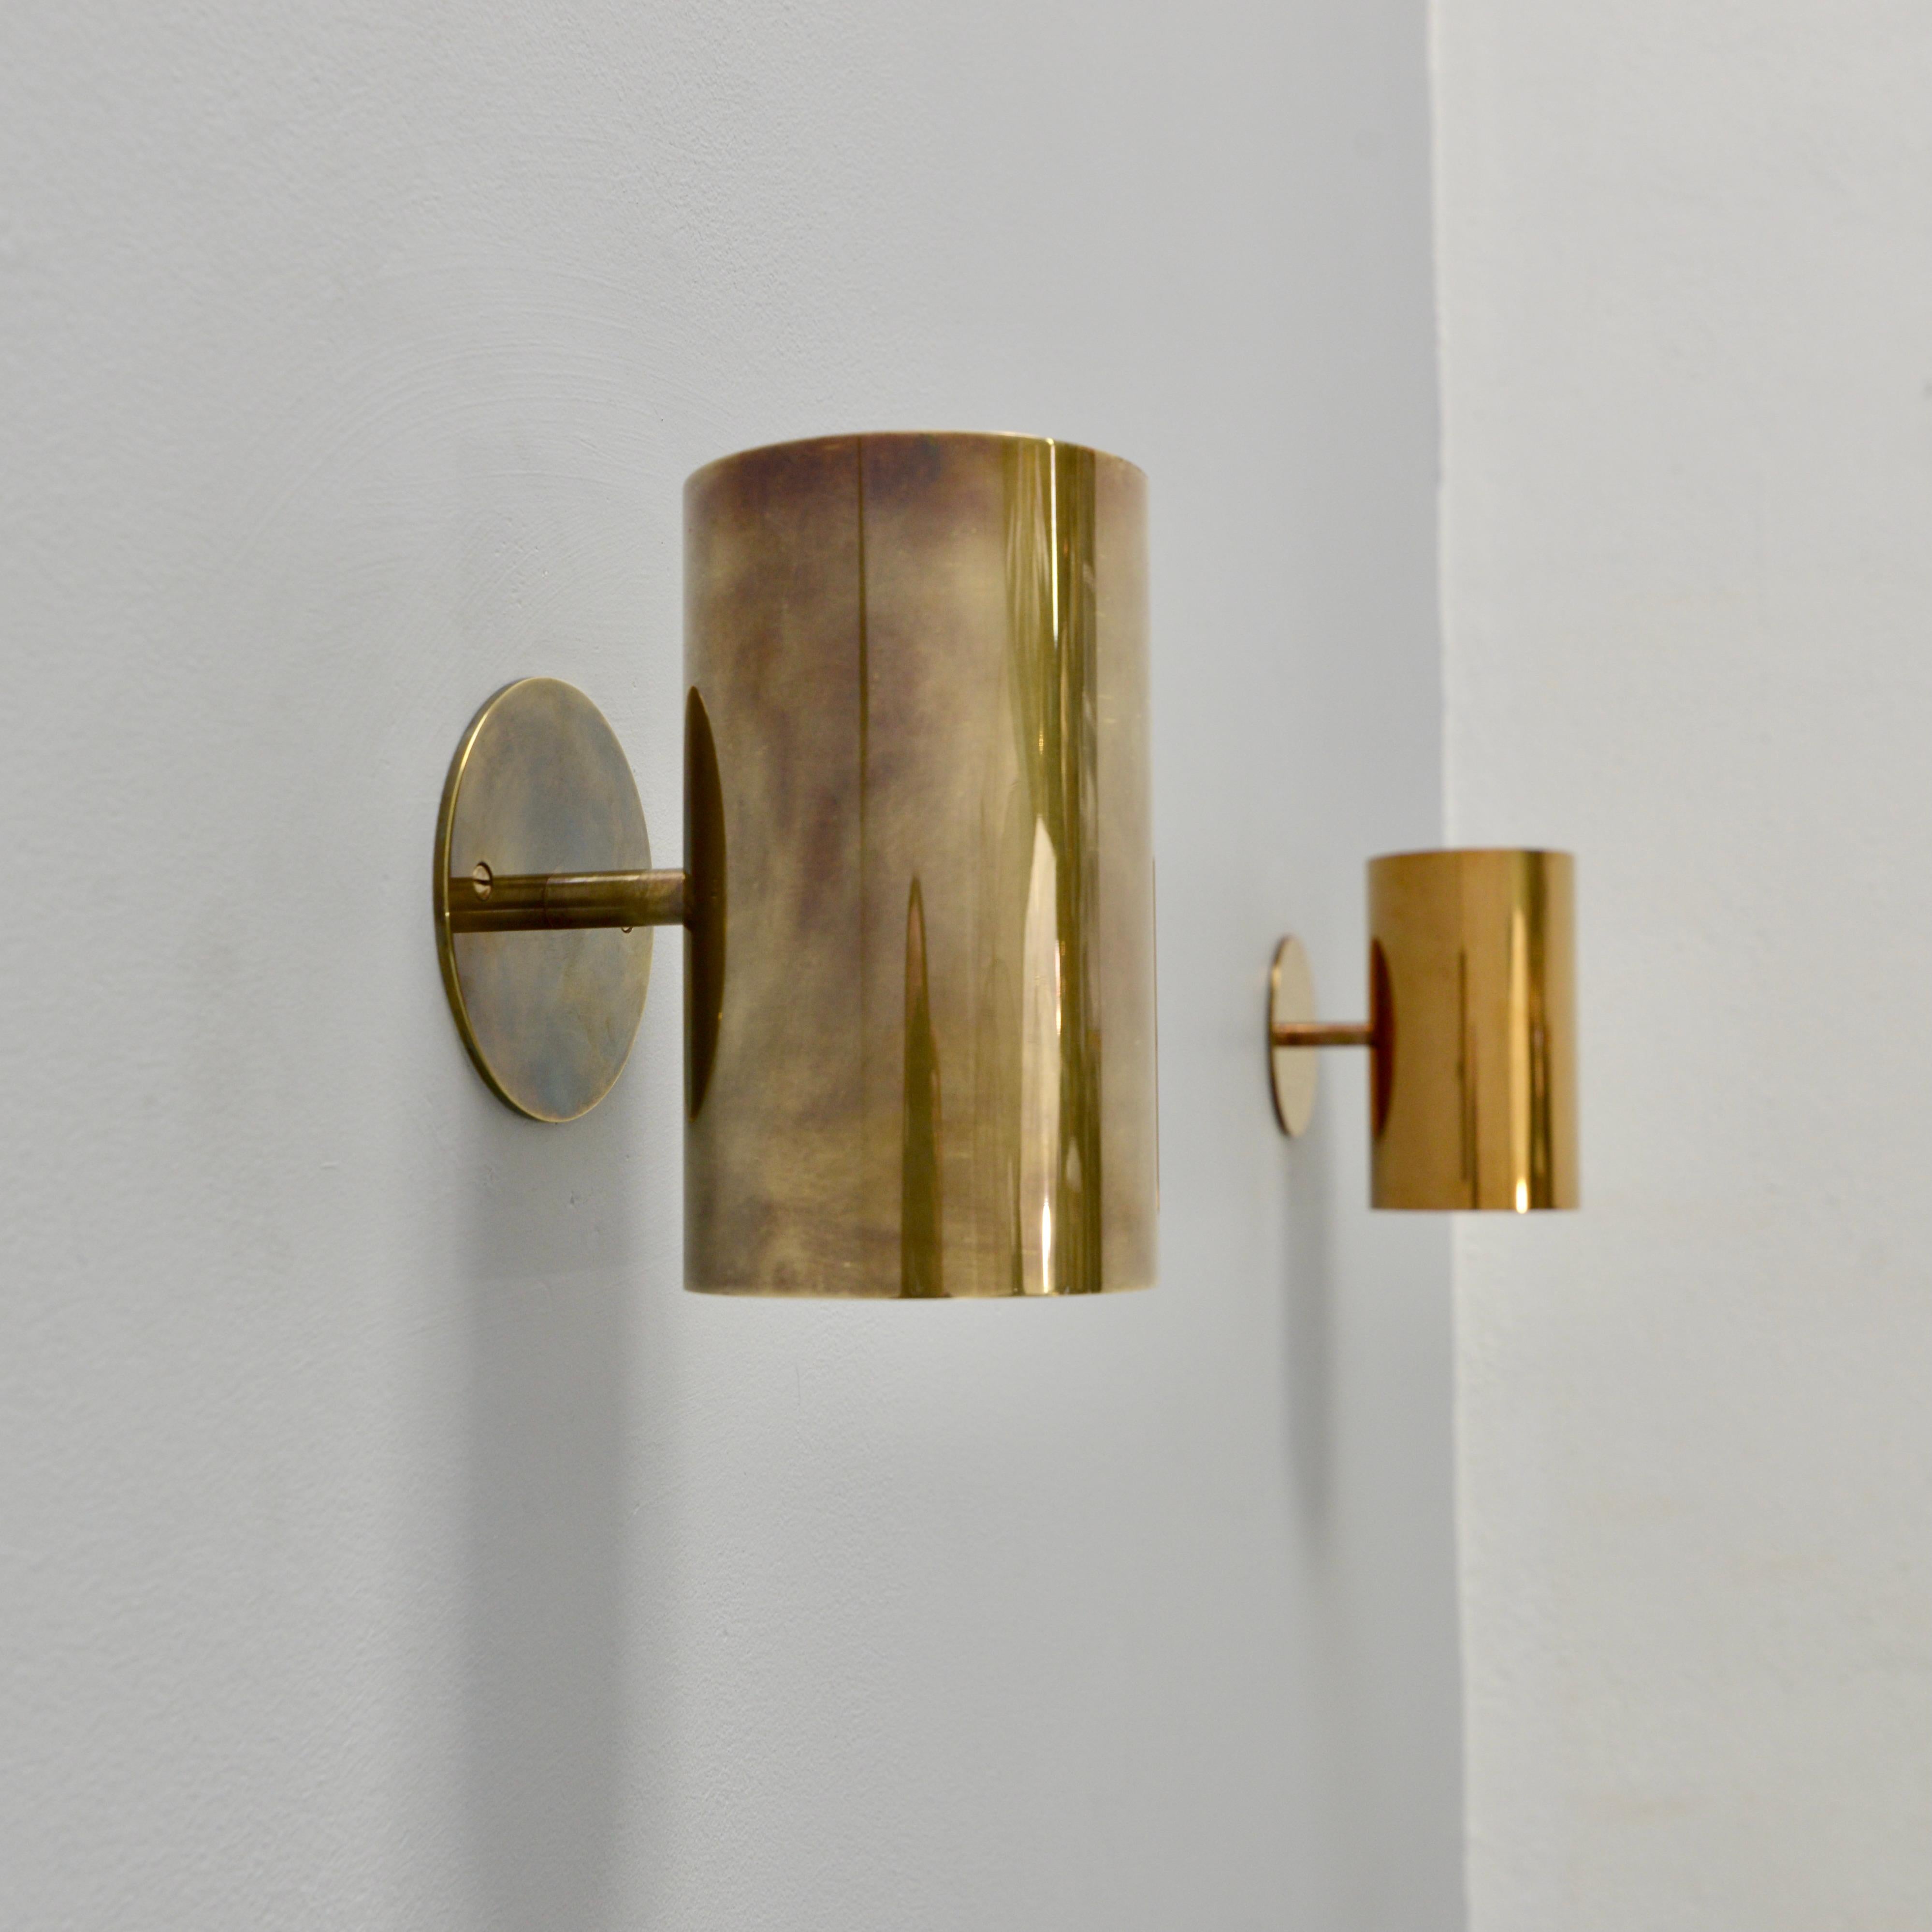 The stunning LUte sconce by Lumfardo Luminaires is an up and down fixed cylindrical wall sconce in unlacquered patinated brass or unlacquered gold finish. An all brass fixture, with illumination emitting from the top and from the bottom of the